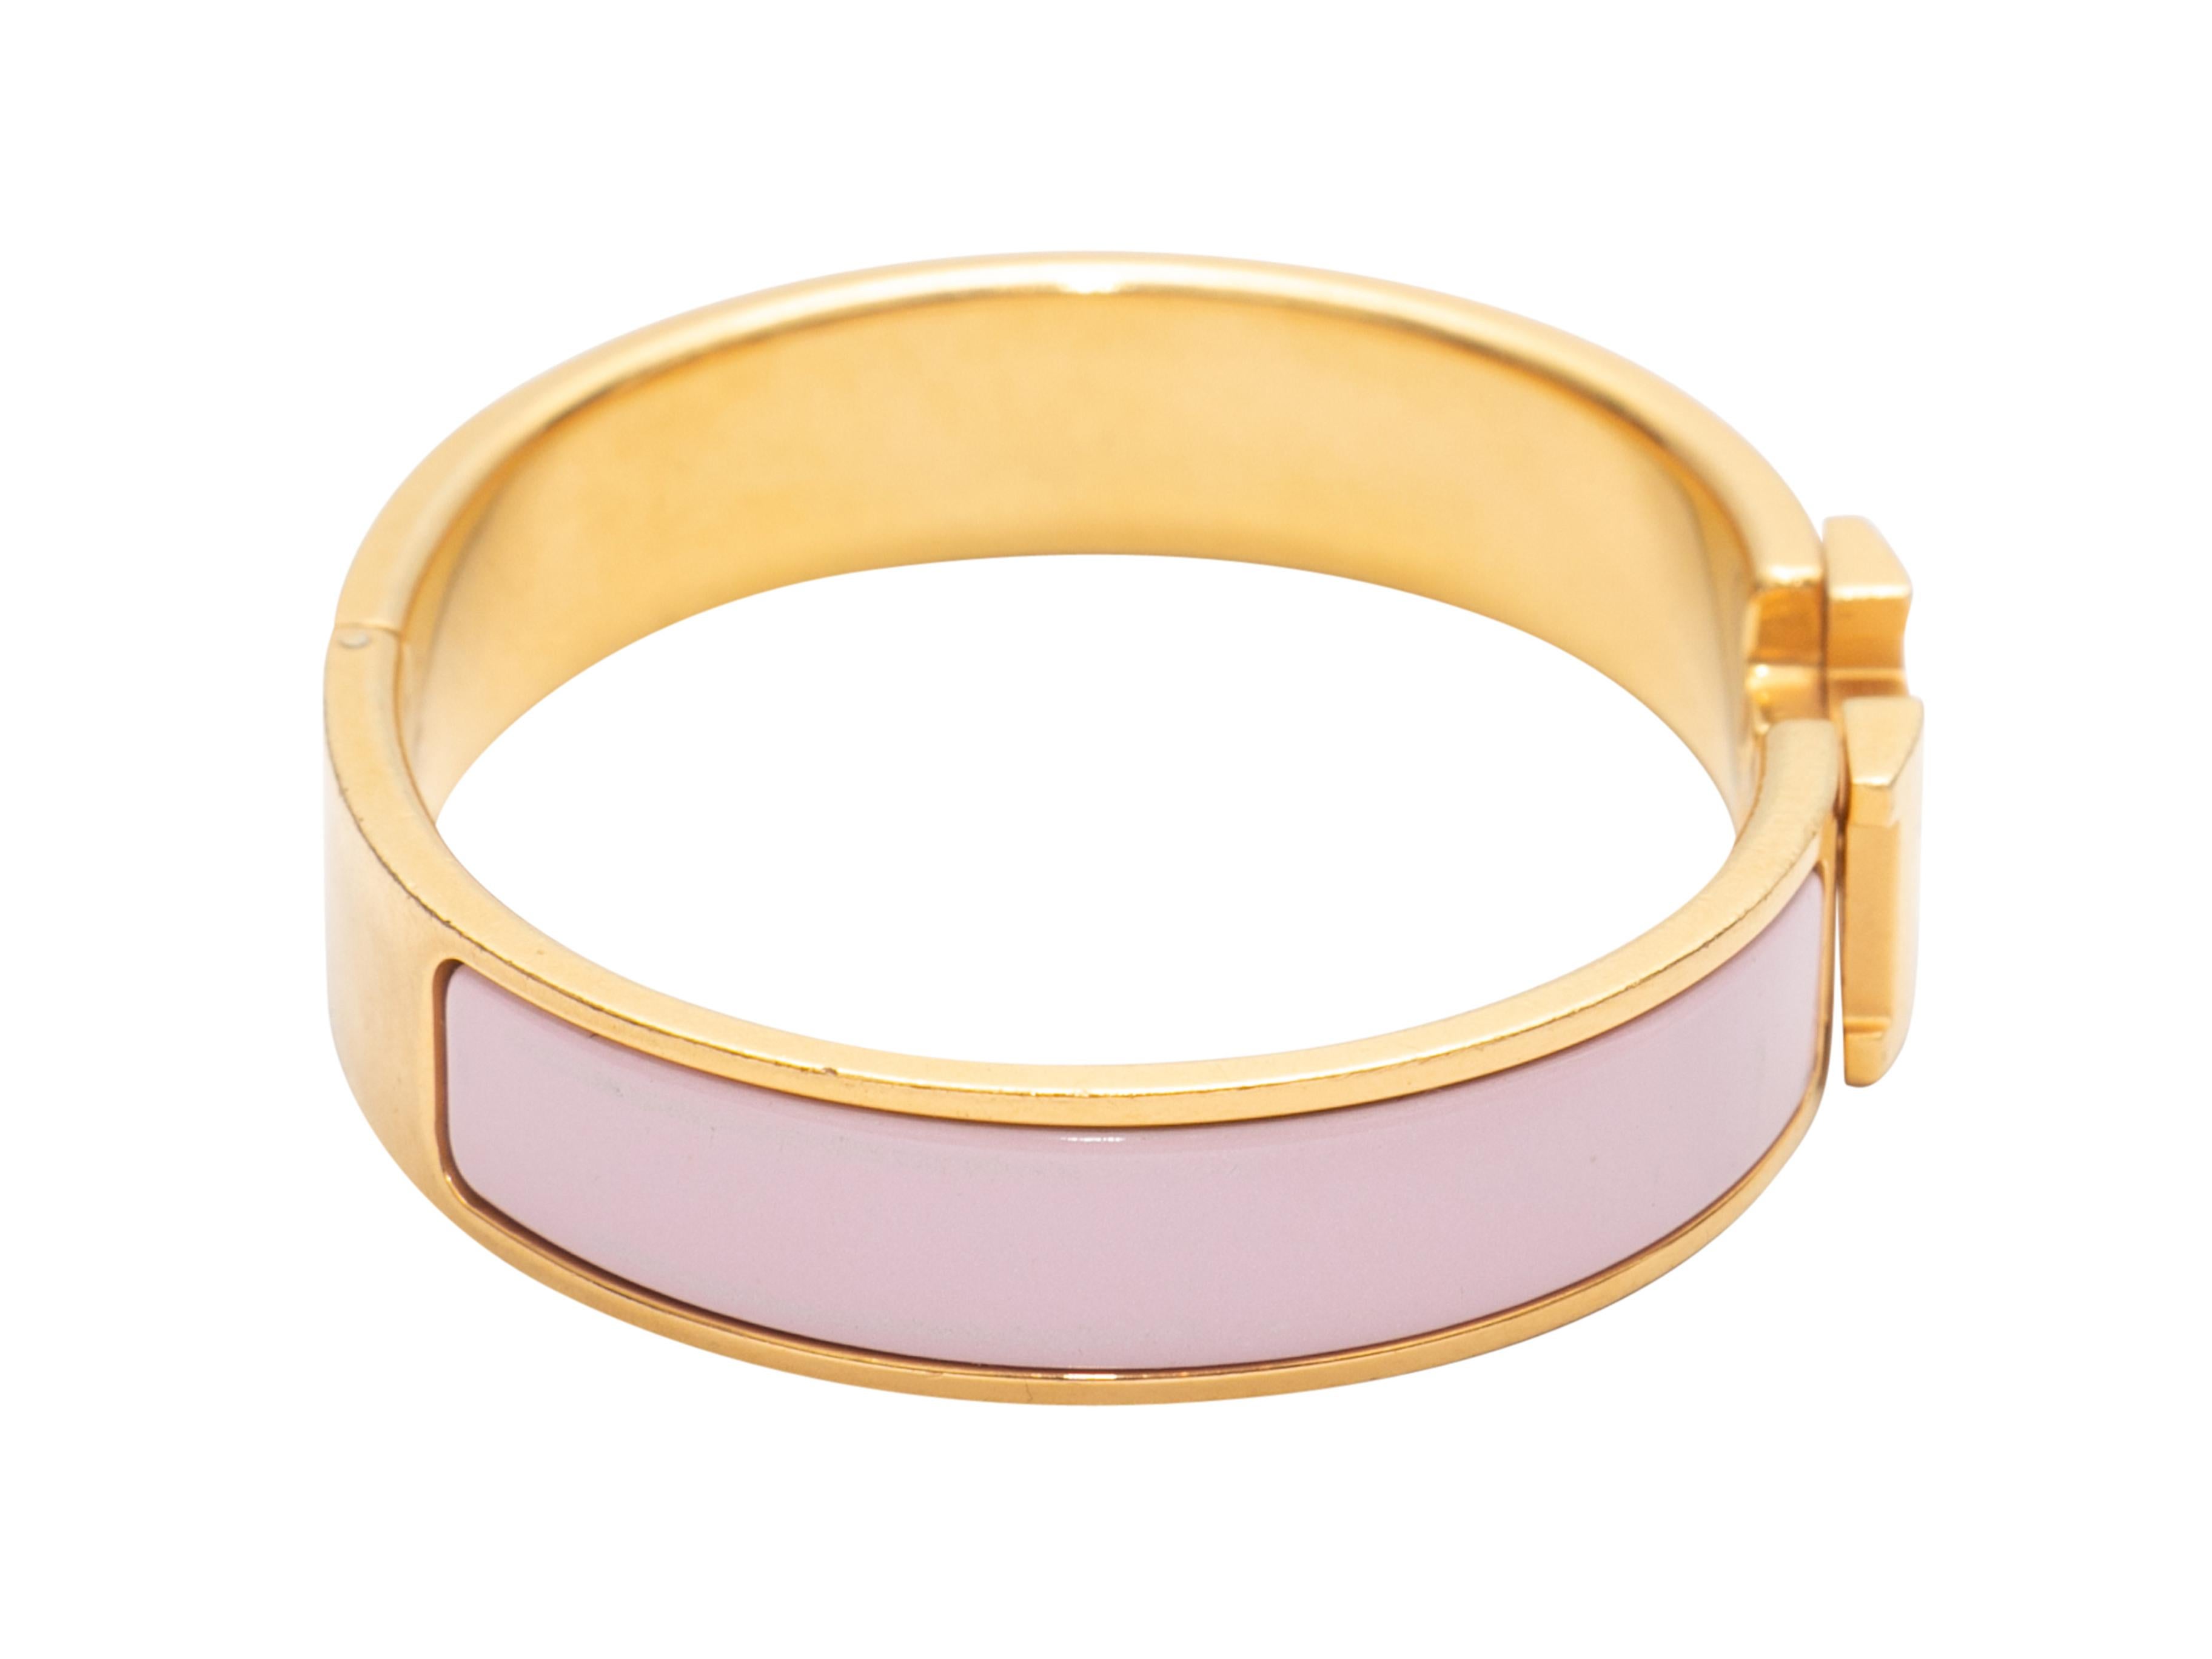 Pink and gold-tone Clic H bracelet by Hermes. 0.5